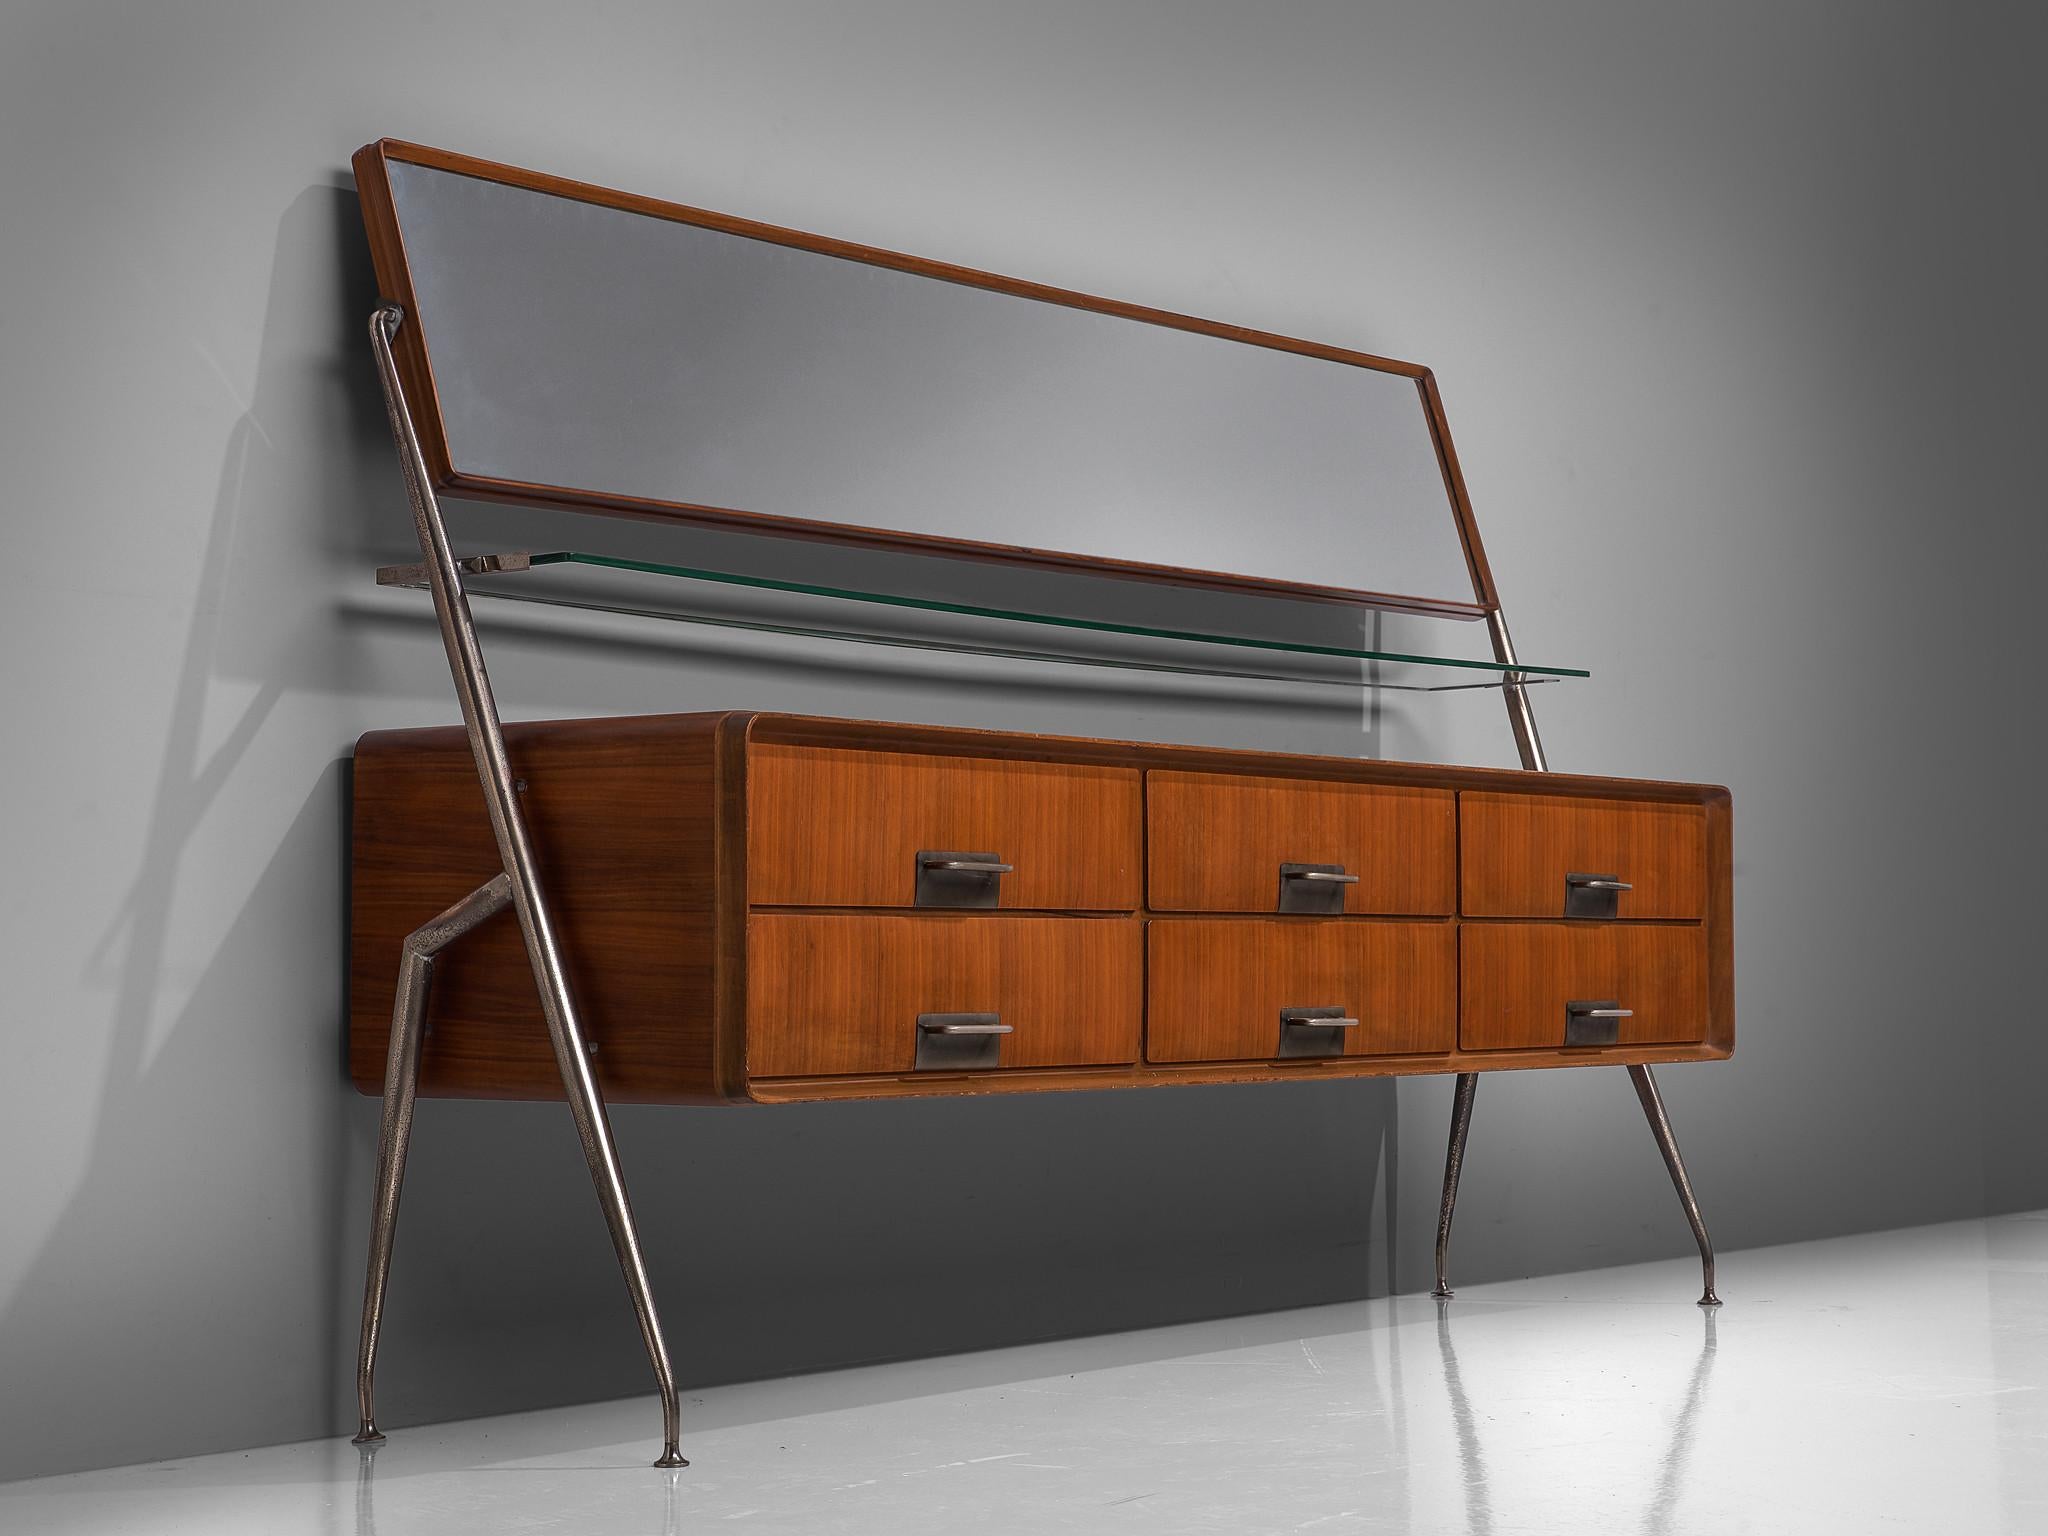 Silvio Cavatorta, sideboard with mirror, metal, mahogany veneer, glass, Italy, 1958.

Elegant Italian sideboard designed by Silvio Cavatorta in 1958. This large cabinet is equipped with six drawers, a glass shelf and a large mirror. The piece is